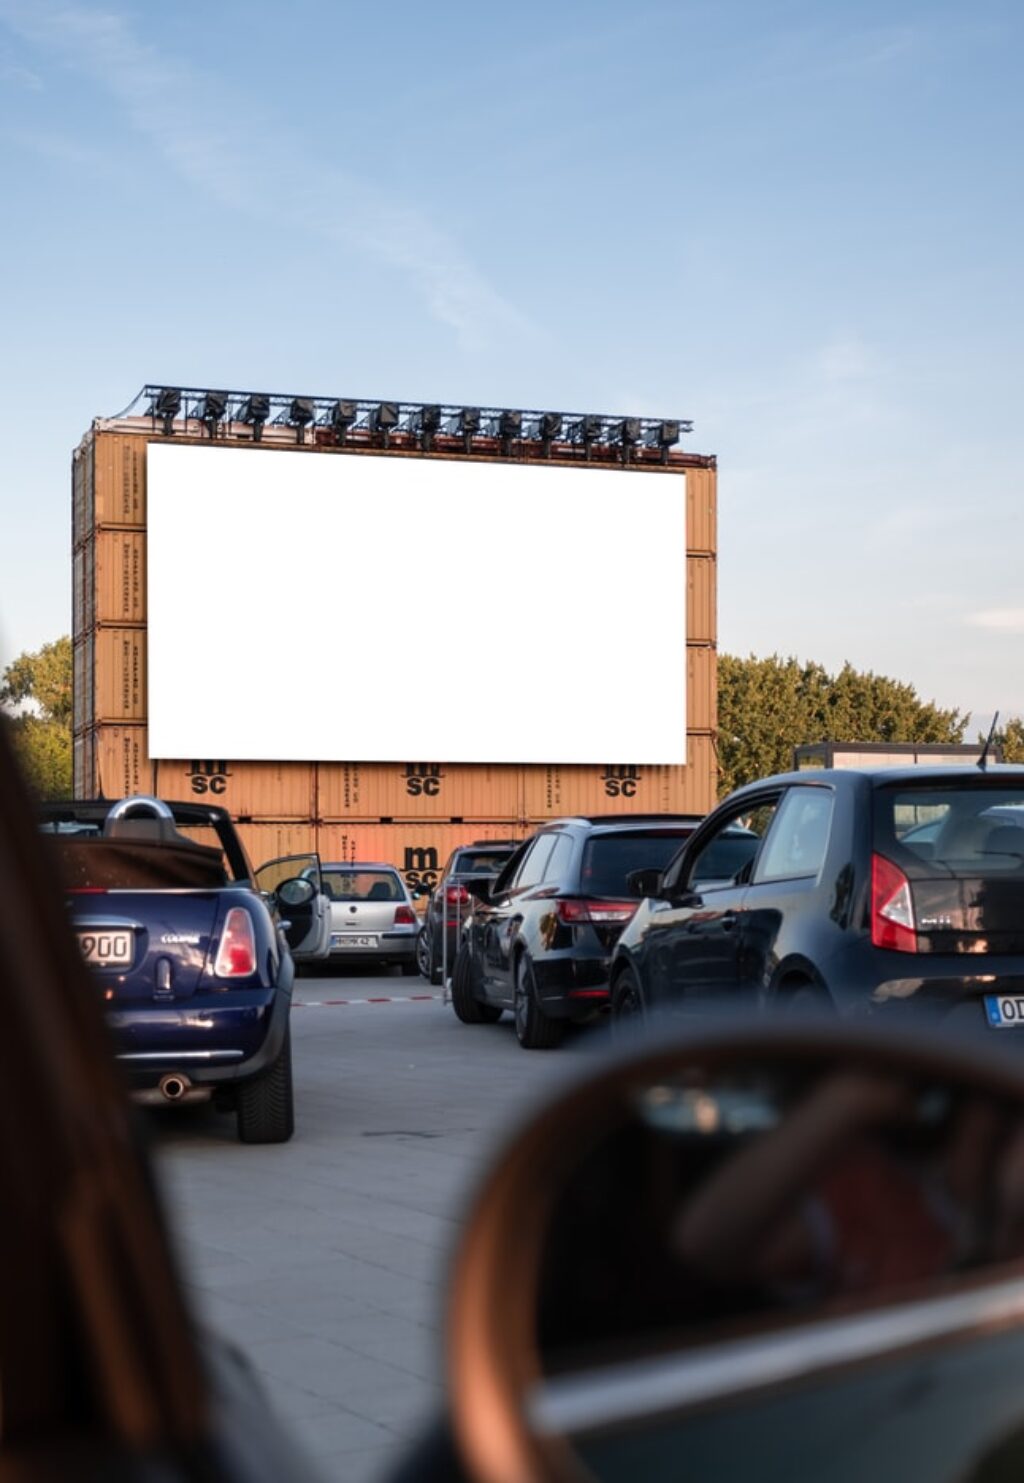 Thriving business: drive-in theatre